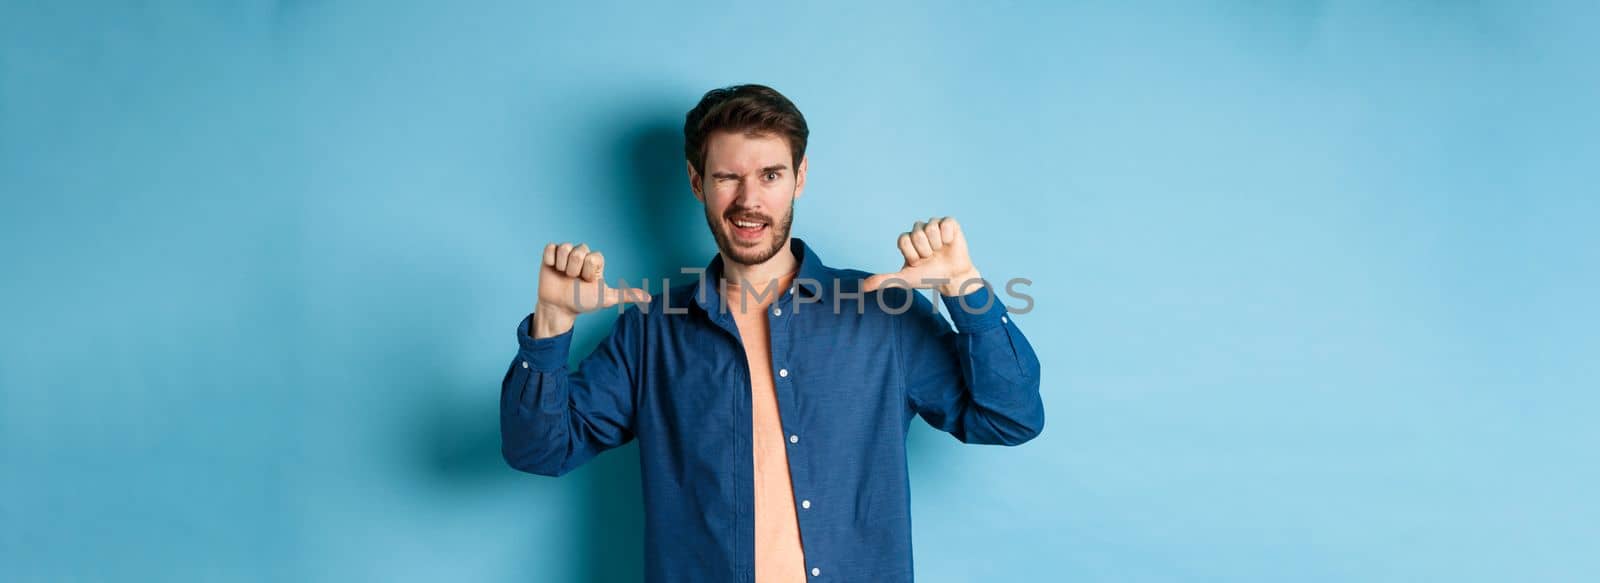 Confident man winking and pointing at himself, self-promoting, standing on blue background. Copy space